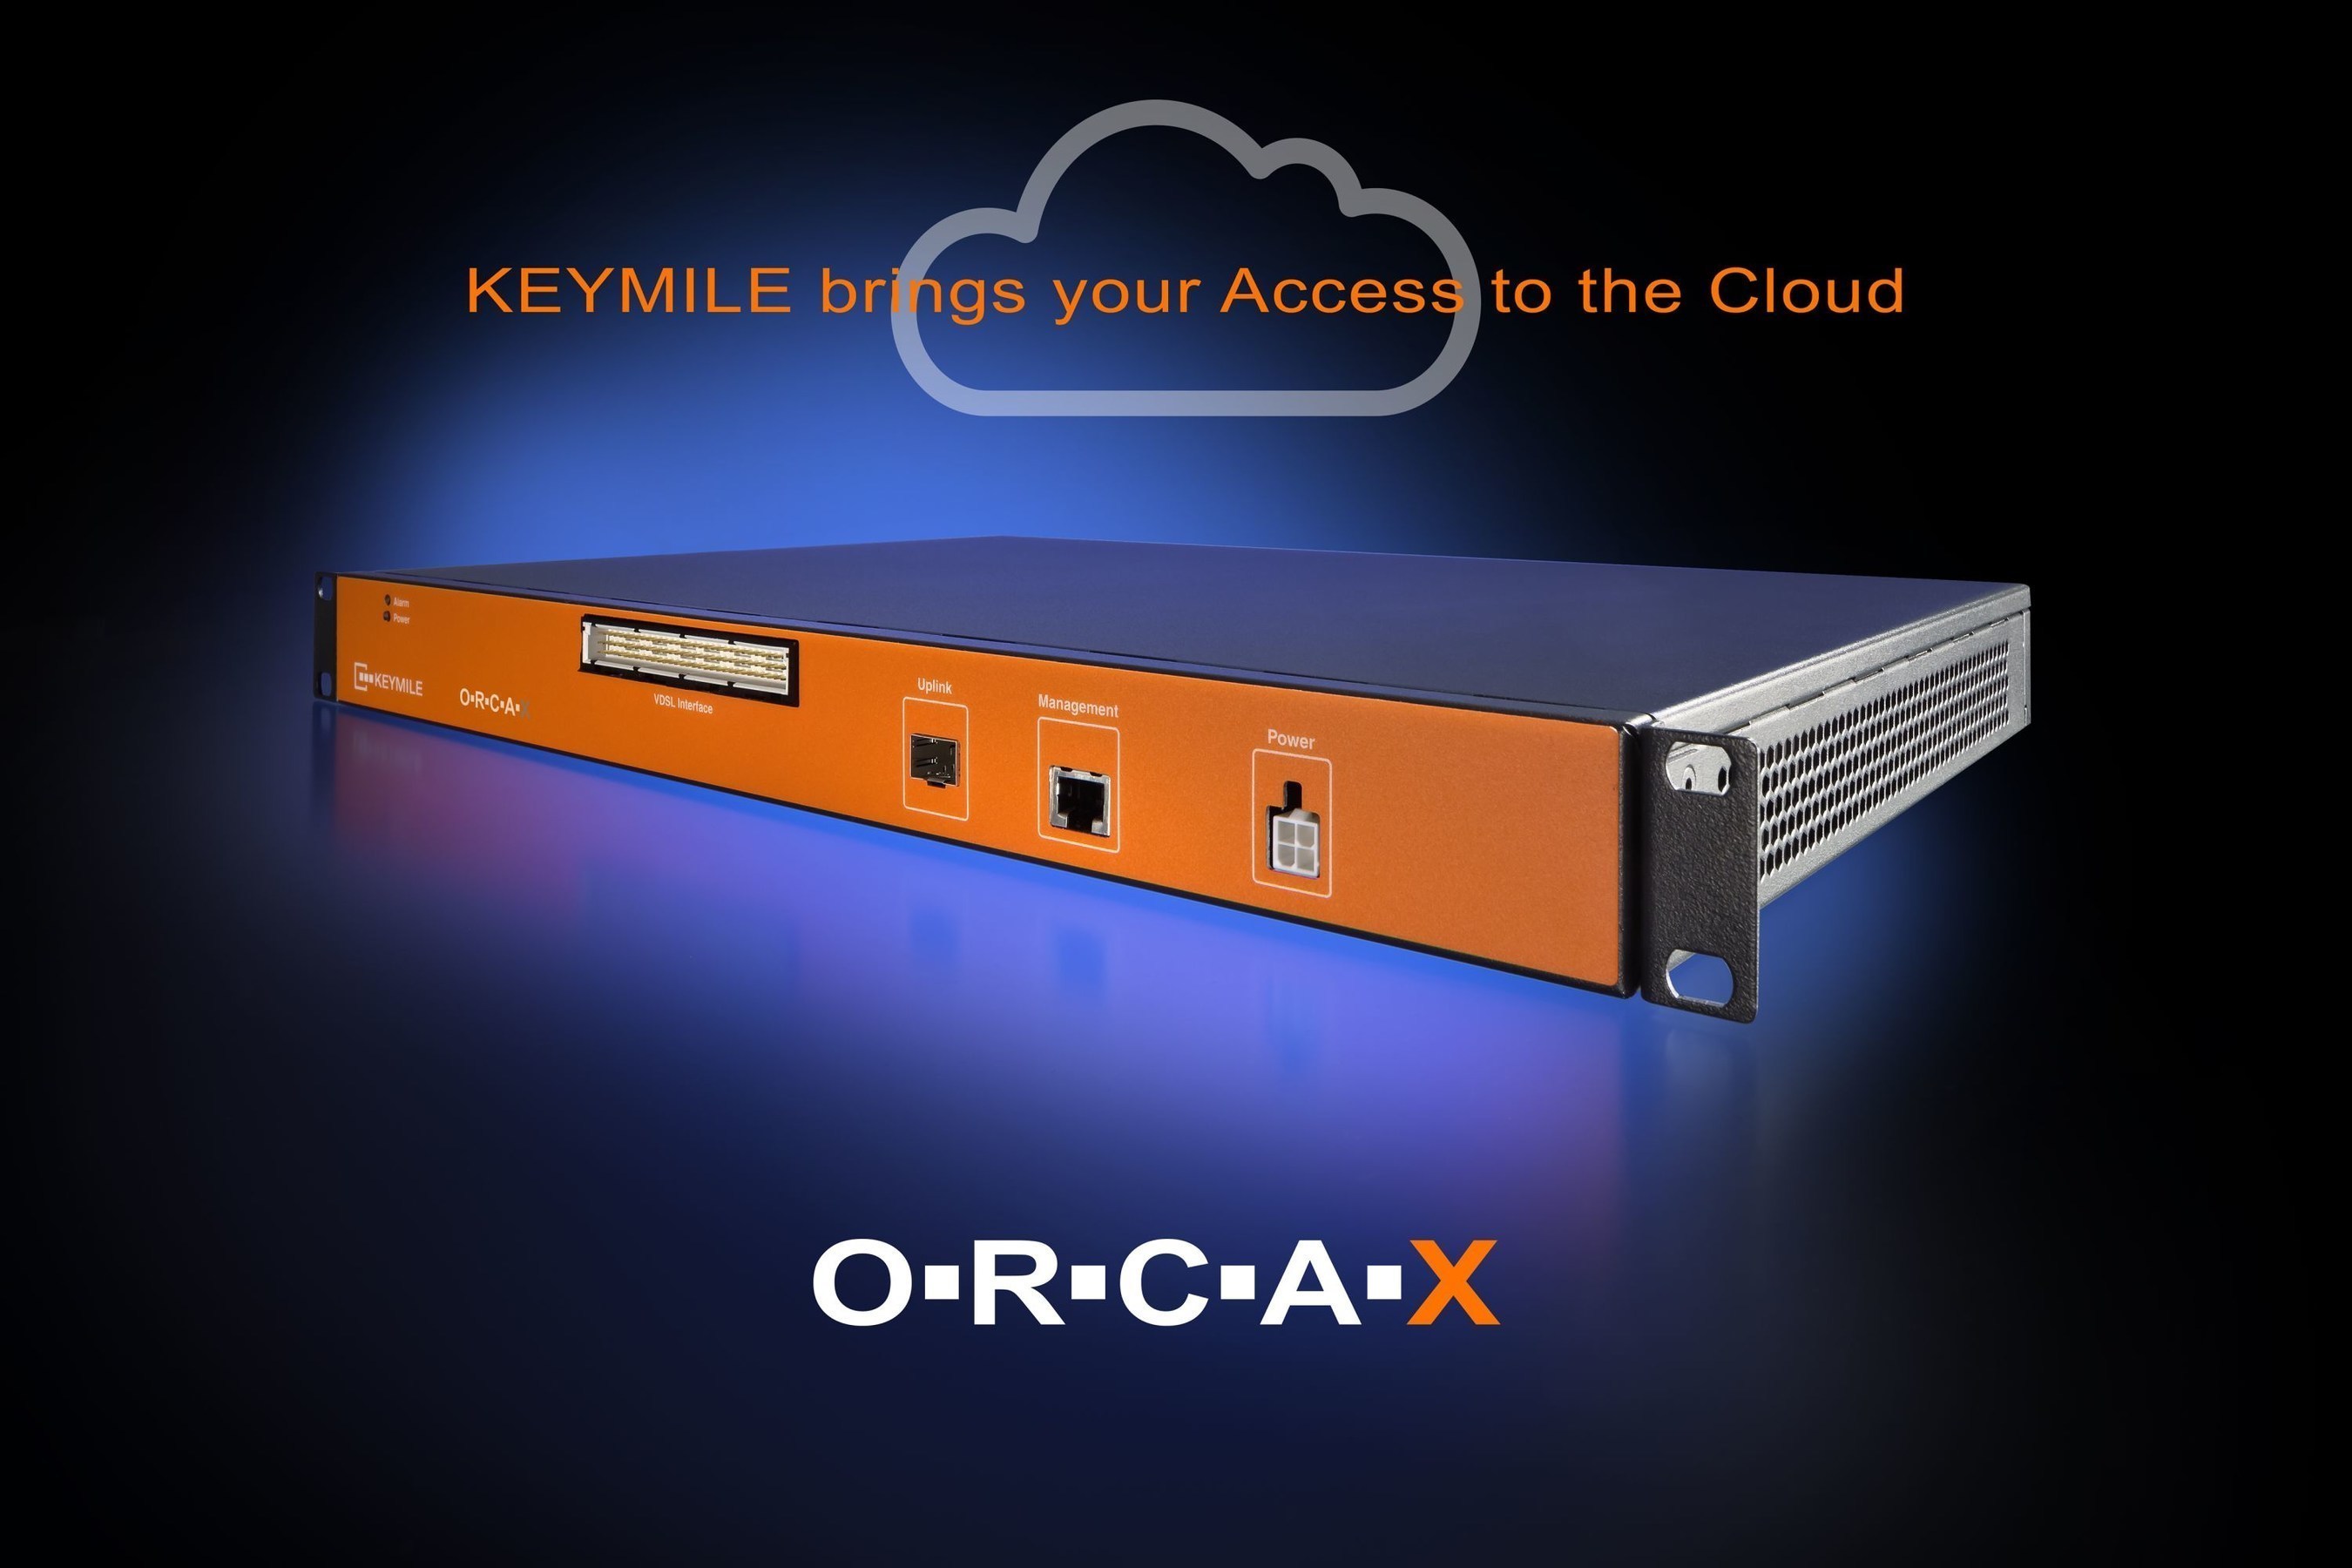 OrcaX is a world first and set to transform multi-service access network (MSAN) elements by fusing them into the cloud network revolution in the most significant recent ICT paradigm shift (Source: KEYMILE). (PRNewsFoto/KEYMILE) (PRNewsFoto/KEYMILE)